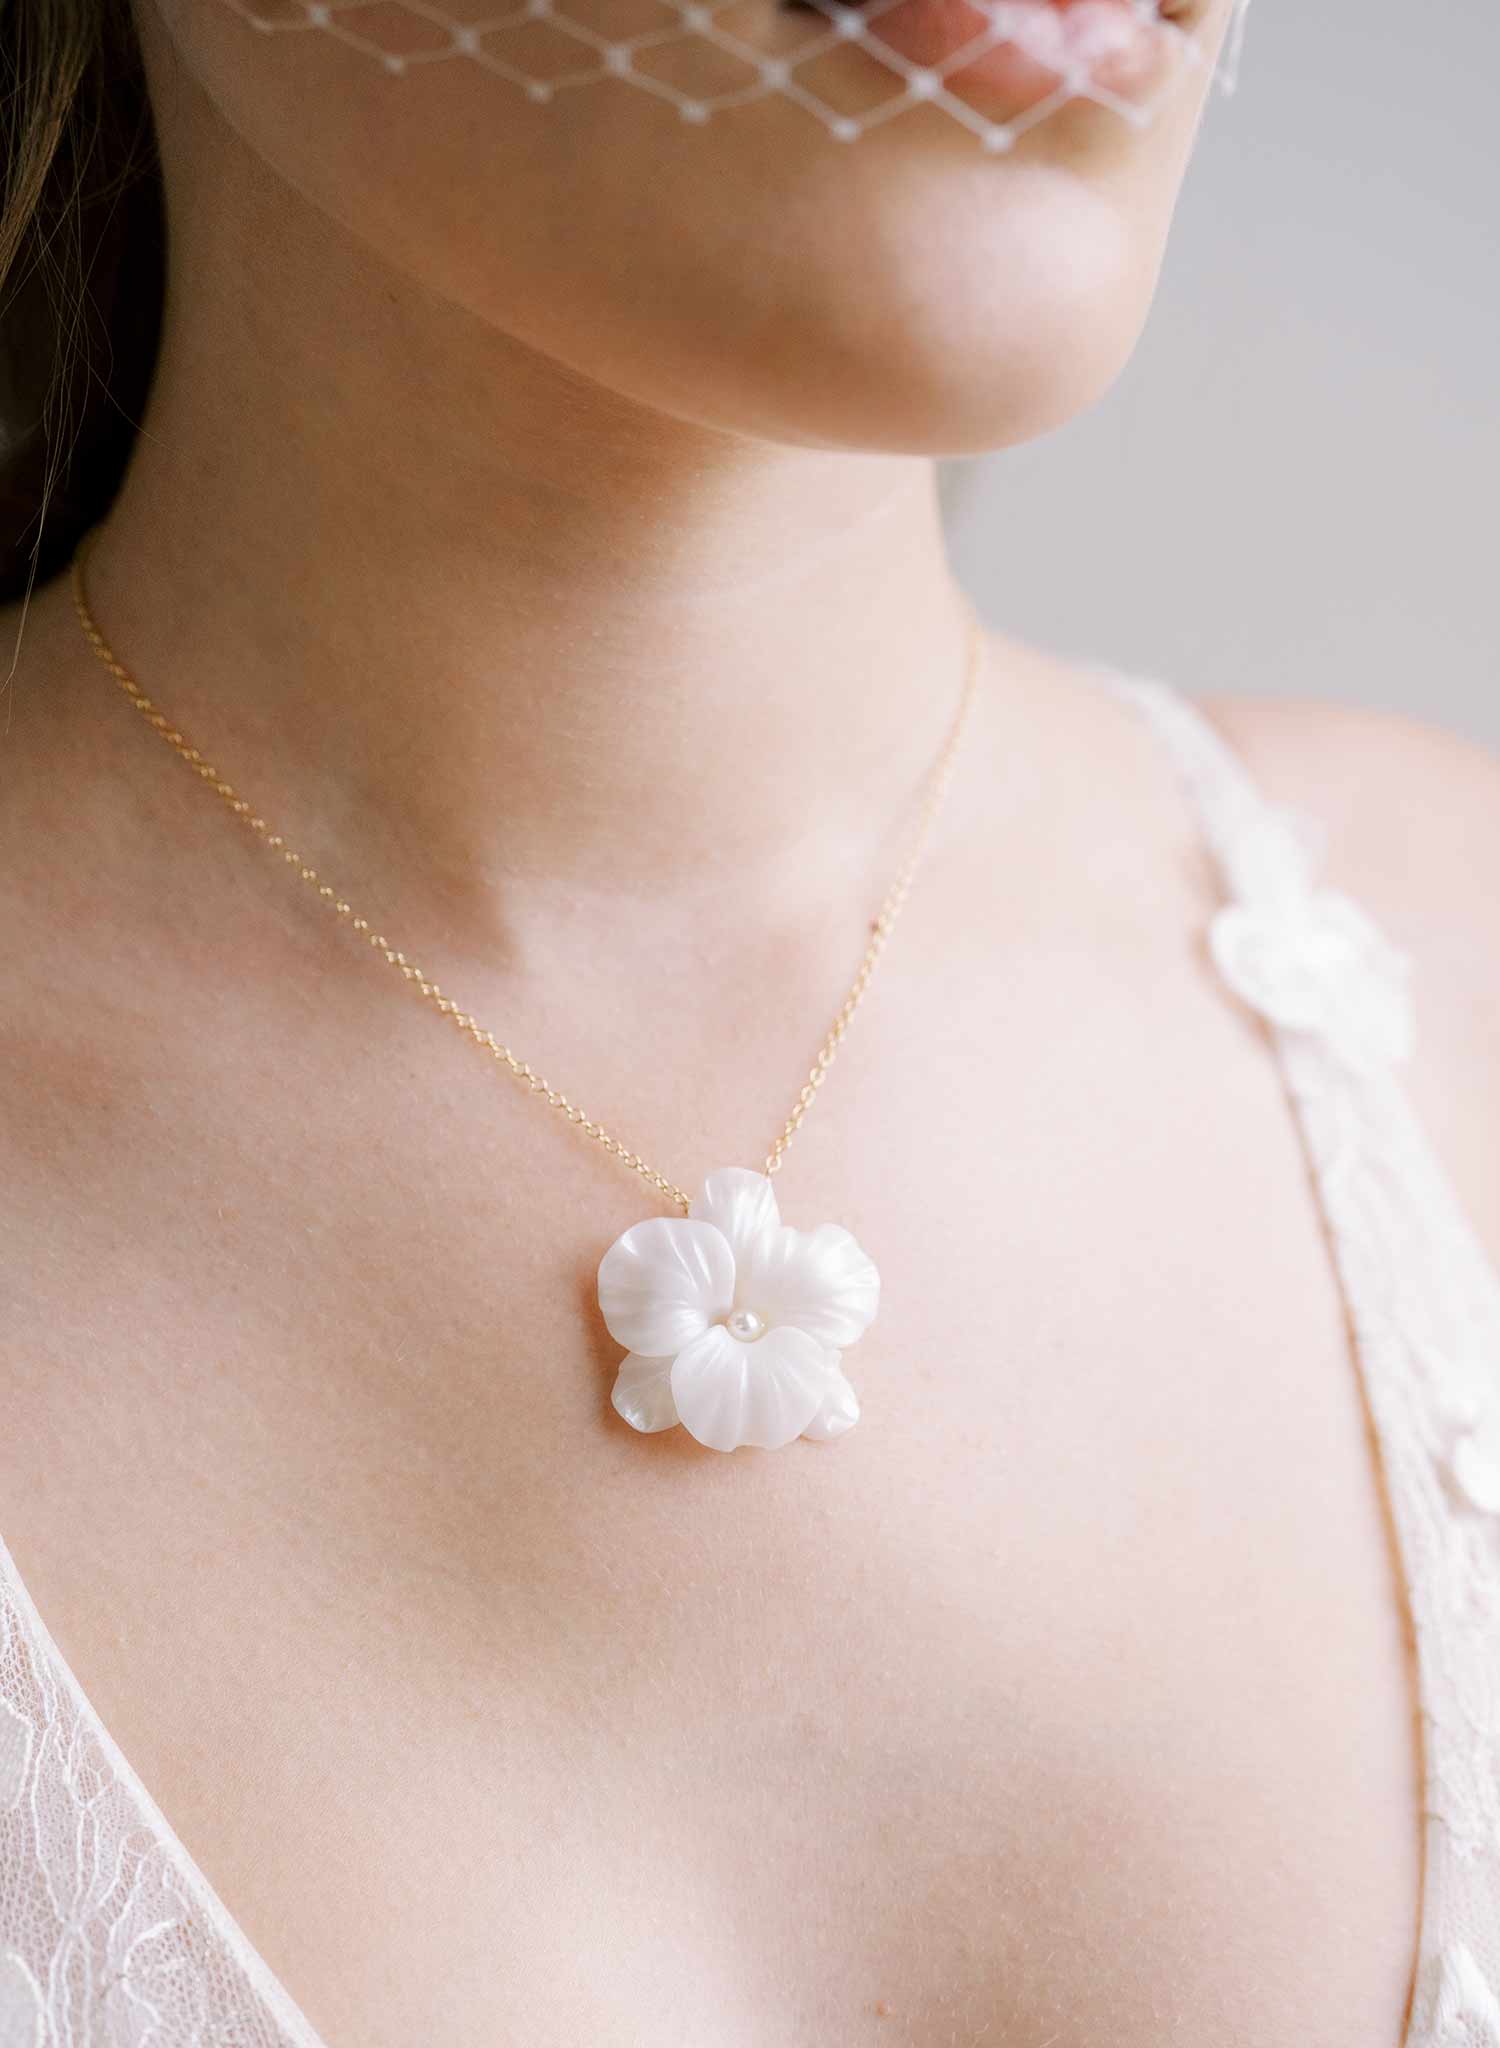 White daisy flower necklace – Handmade by Elyse